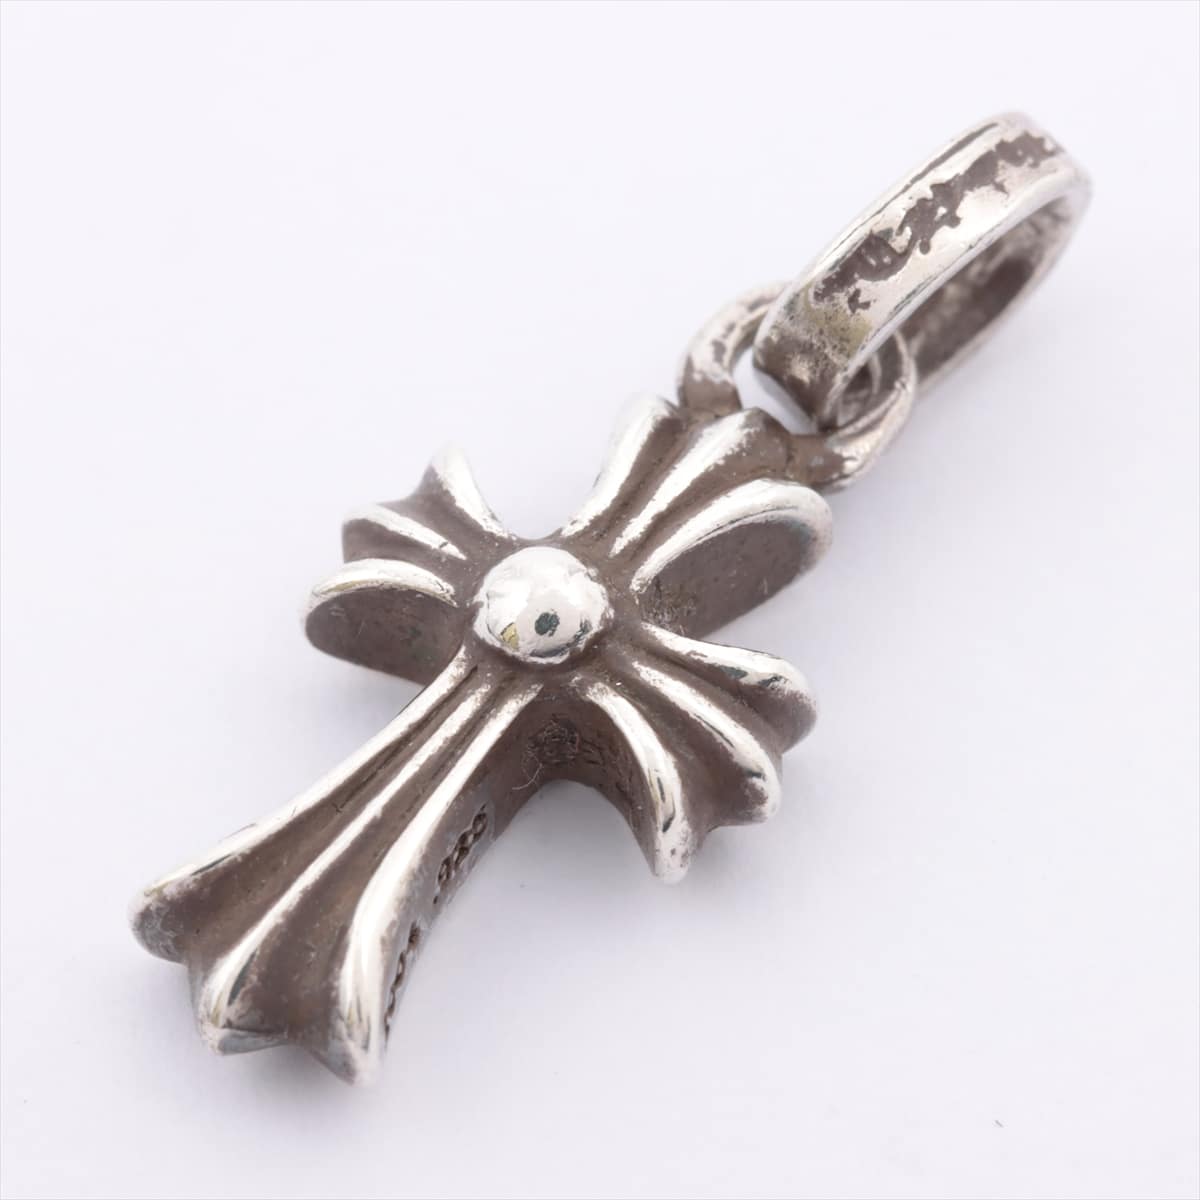 Chrome Hearts CH Cross Baby fat charms Charm 925 1.9g With invoice Pave diamonds